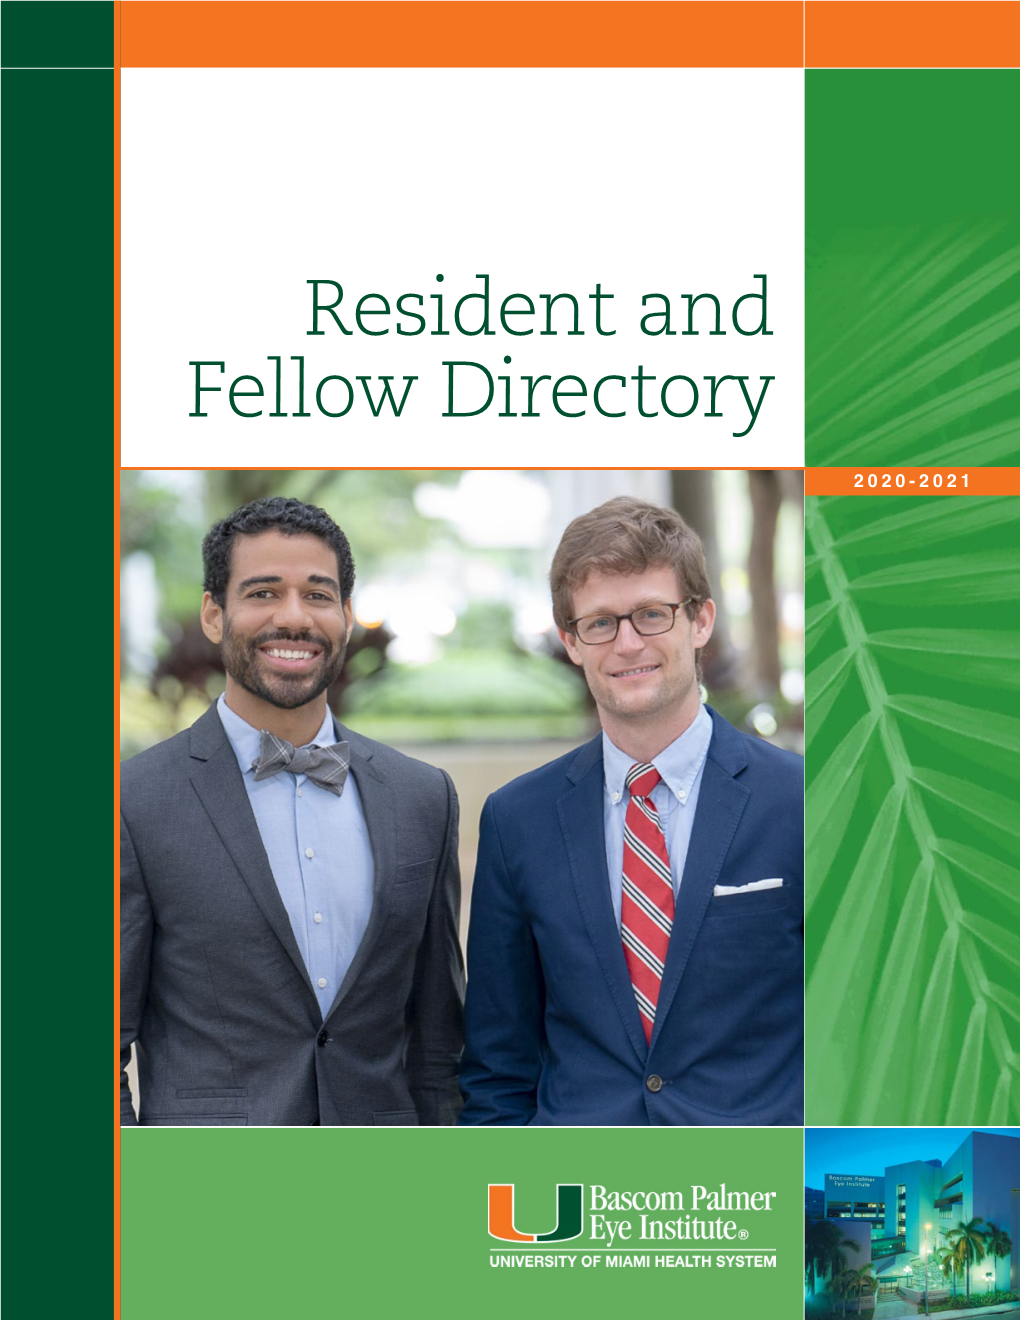 Resident and Fellow Directory 2020-2021